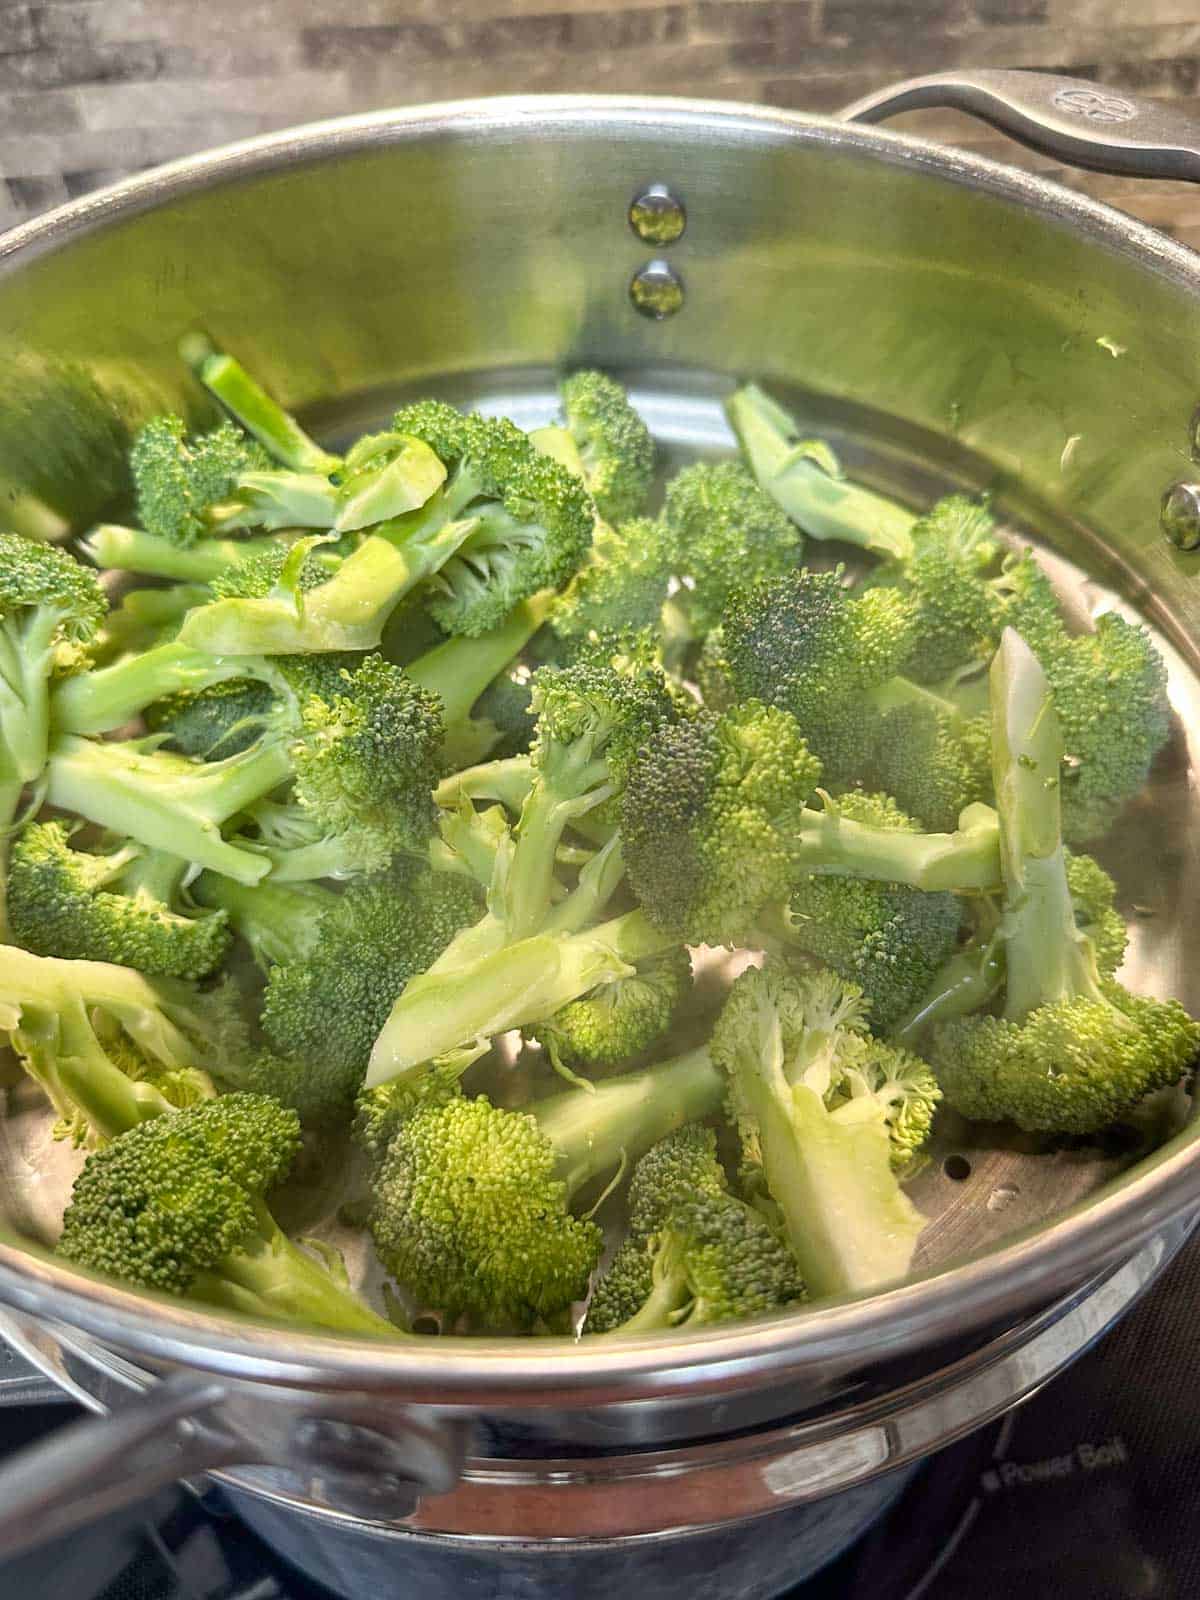 Broccoli florets steaming in a steamer on top of a stove.